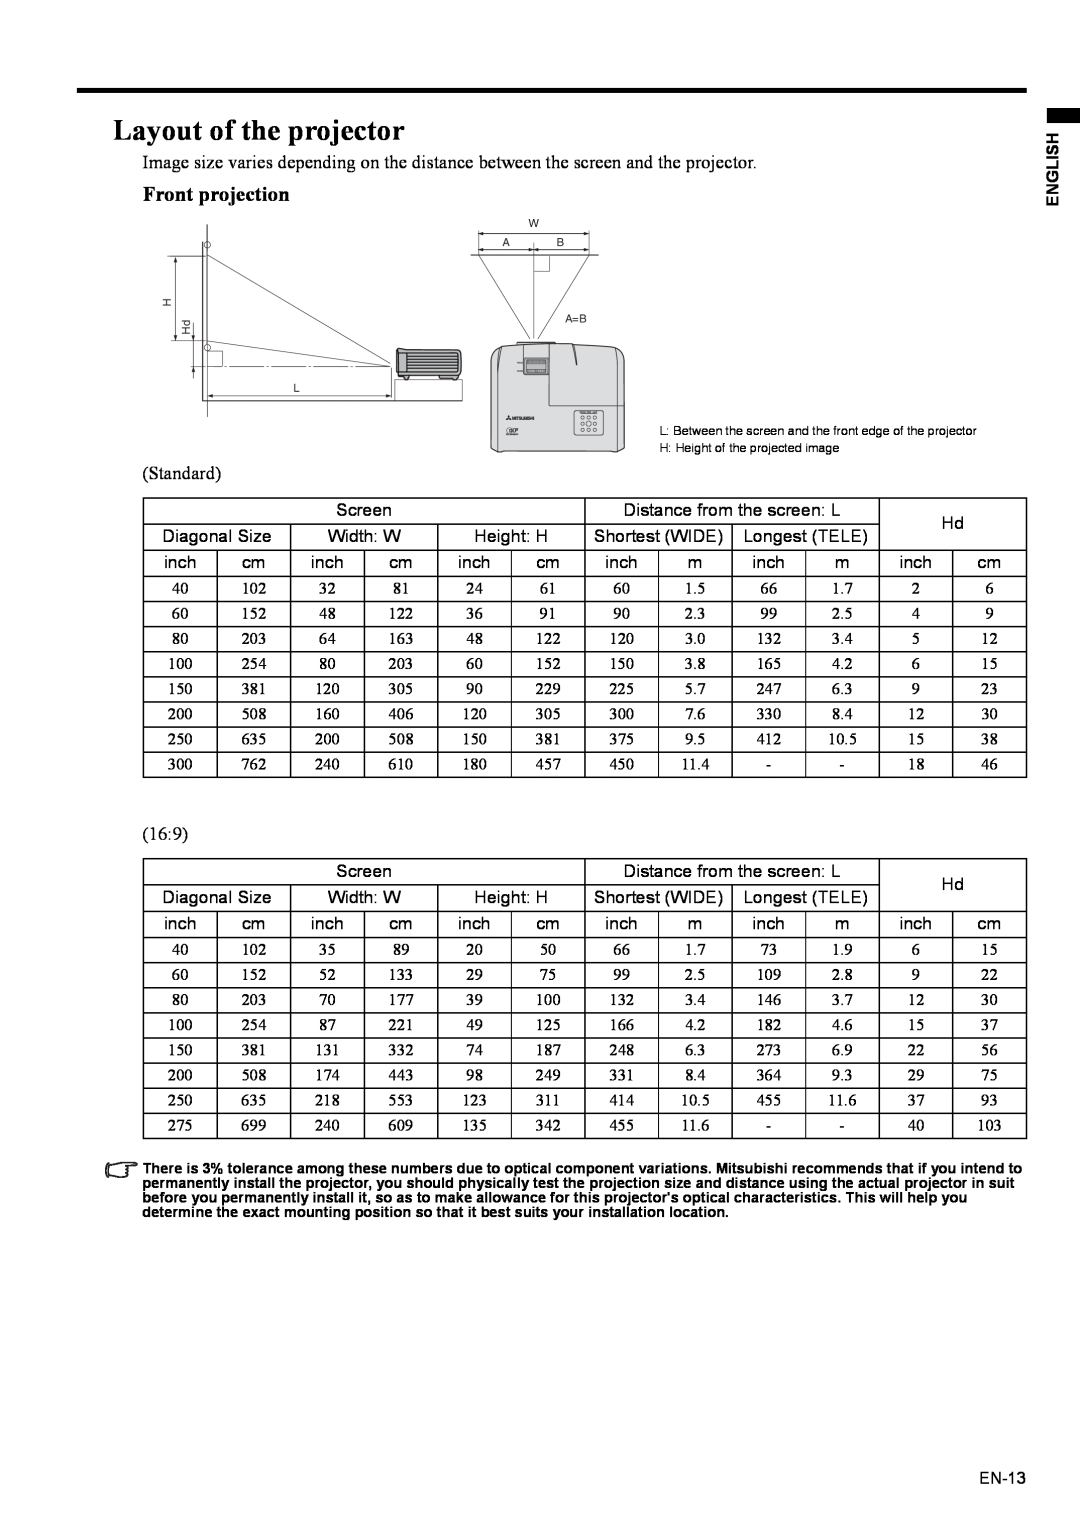 Mitsubishi Electronics EX200U user manual Layout of the projector, Front projection 